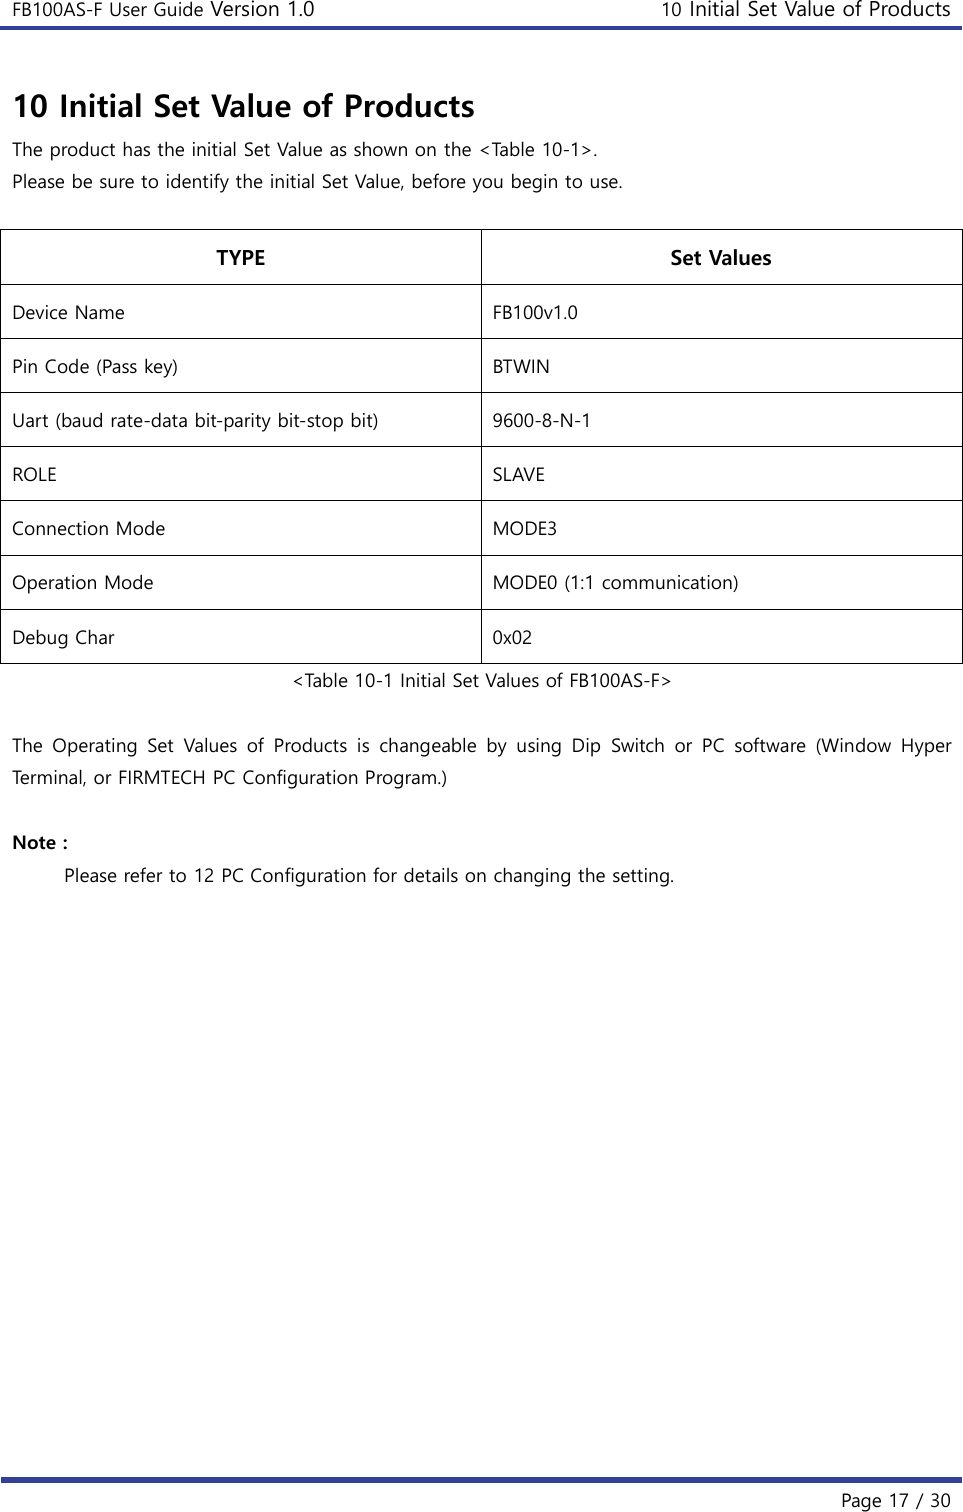 FB100AS-F User Guide Version 1.0 10 Initial Set Value of Products   Page 17 / 30  10 Initial Set Value of Products The product has the initial Set Value as shown on the &lt;Table 10-1&gt;. Please be sure to identify the initial Set Value, before you begin to use.  TYPE Set Values Device Name FB100v1.0 Pin Code (Pass key) BTWIN Uart (baud rate-data bit-parity bit-stop bit) 9600-8-N-1 ROLE SLAVE Connection Mode MODE3 Operation Mode MODE0 (1:1 communication) Debug Char 0x02 &lt;Table 10-1 Initial Set Values of FB100AS-F&gt;  The  Operating  Set  Values  of  Products  is  changeable  by  using  Dip  Switch  or  PC  software  (Window  Hyper Terminal, or FIRMTECH PC Configuration Program.)  Note : Please refer to 12 PC Configuration for details on changing the setting.     